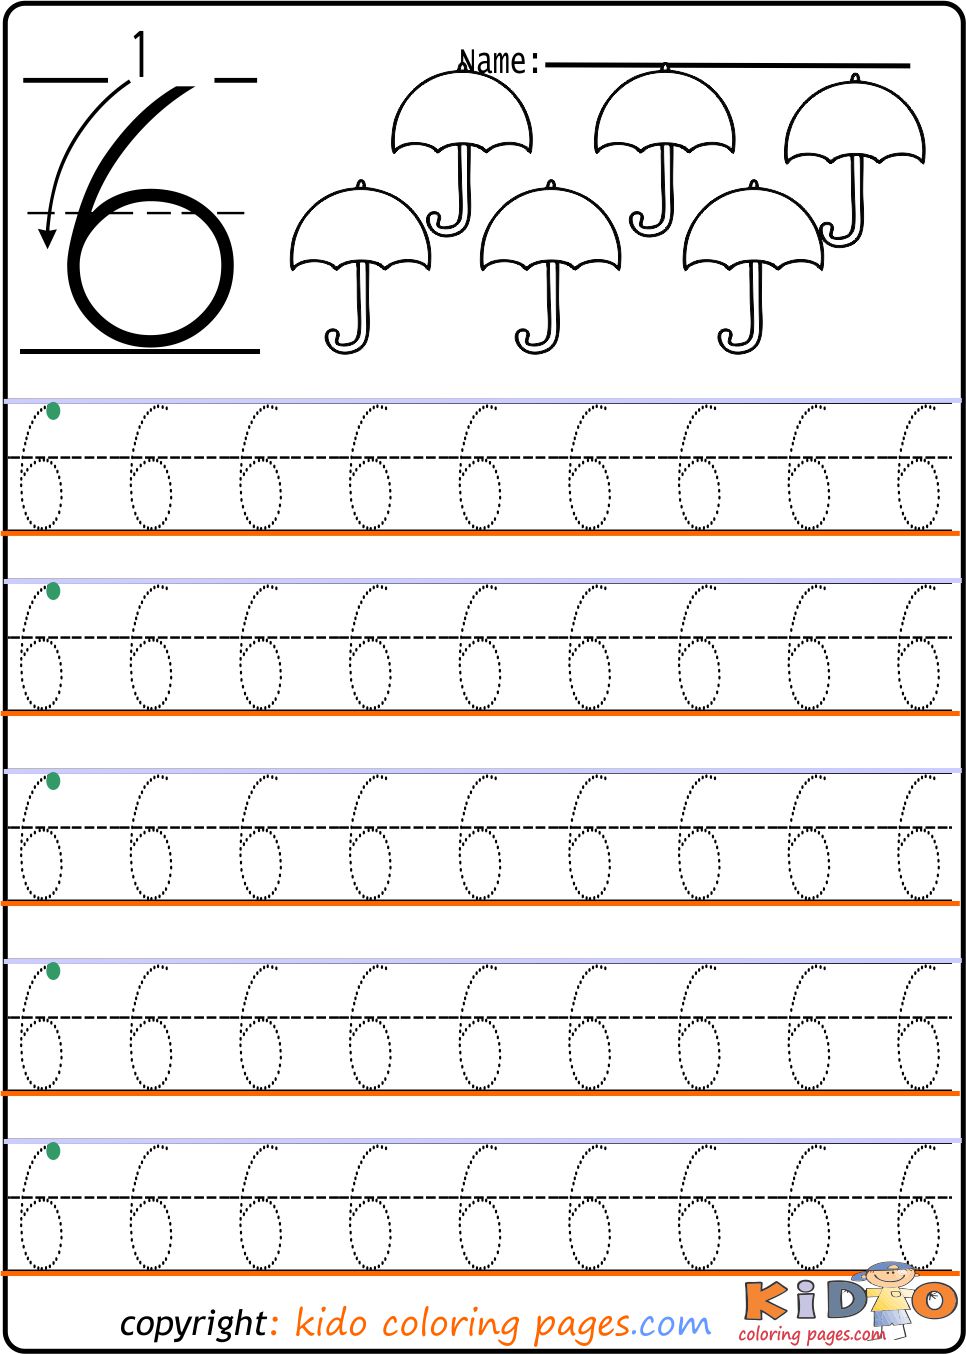 number-0-tracing-worksheets-15-free-pages-printabulls